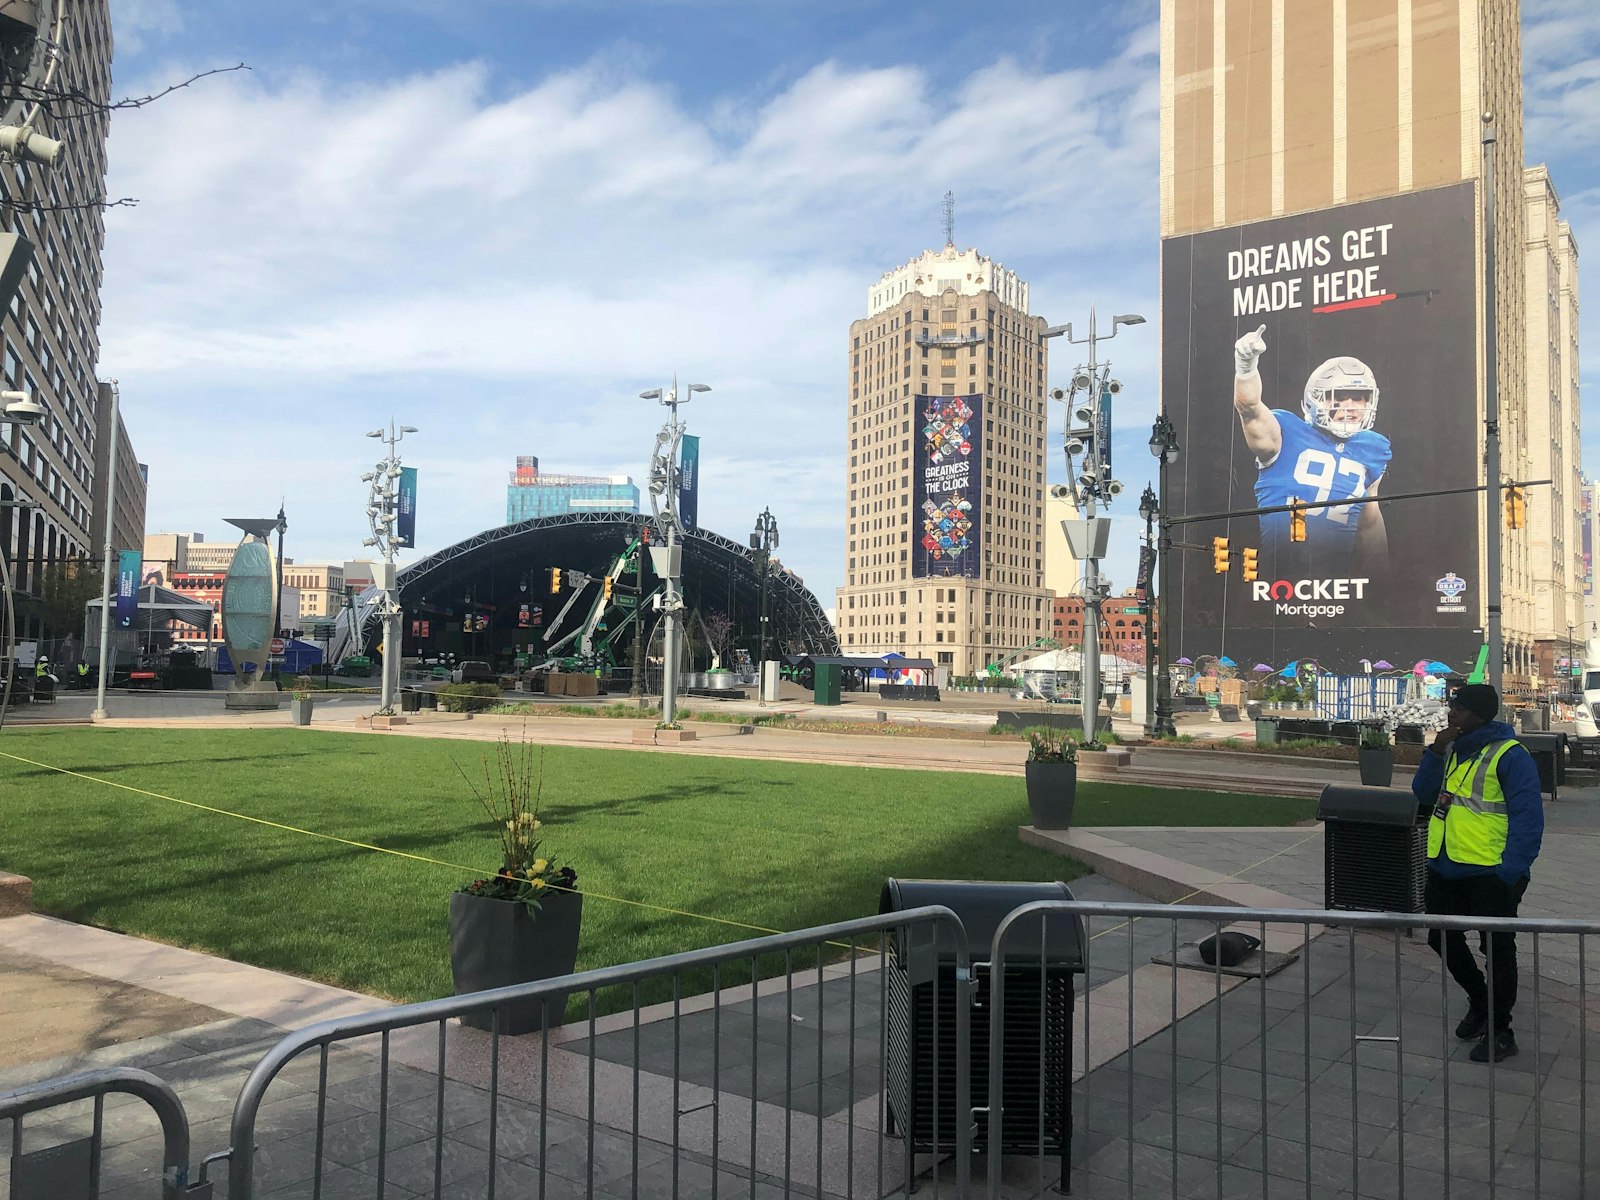 The stage for this year's NFL Draft in downtown Detroit's Cadillac Square is overshadowed by a larger-than-life poster of Aidan Hutchinson, the Detroit Lions' No. 2 overall pick in 2022 and a product of Divine Child High School in Dearborn. (Michael Stechschulte | Detroit Catholic)